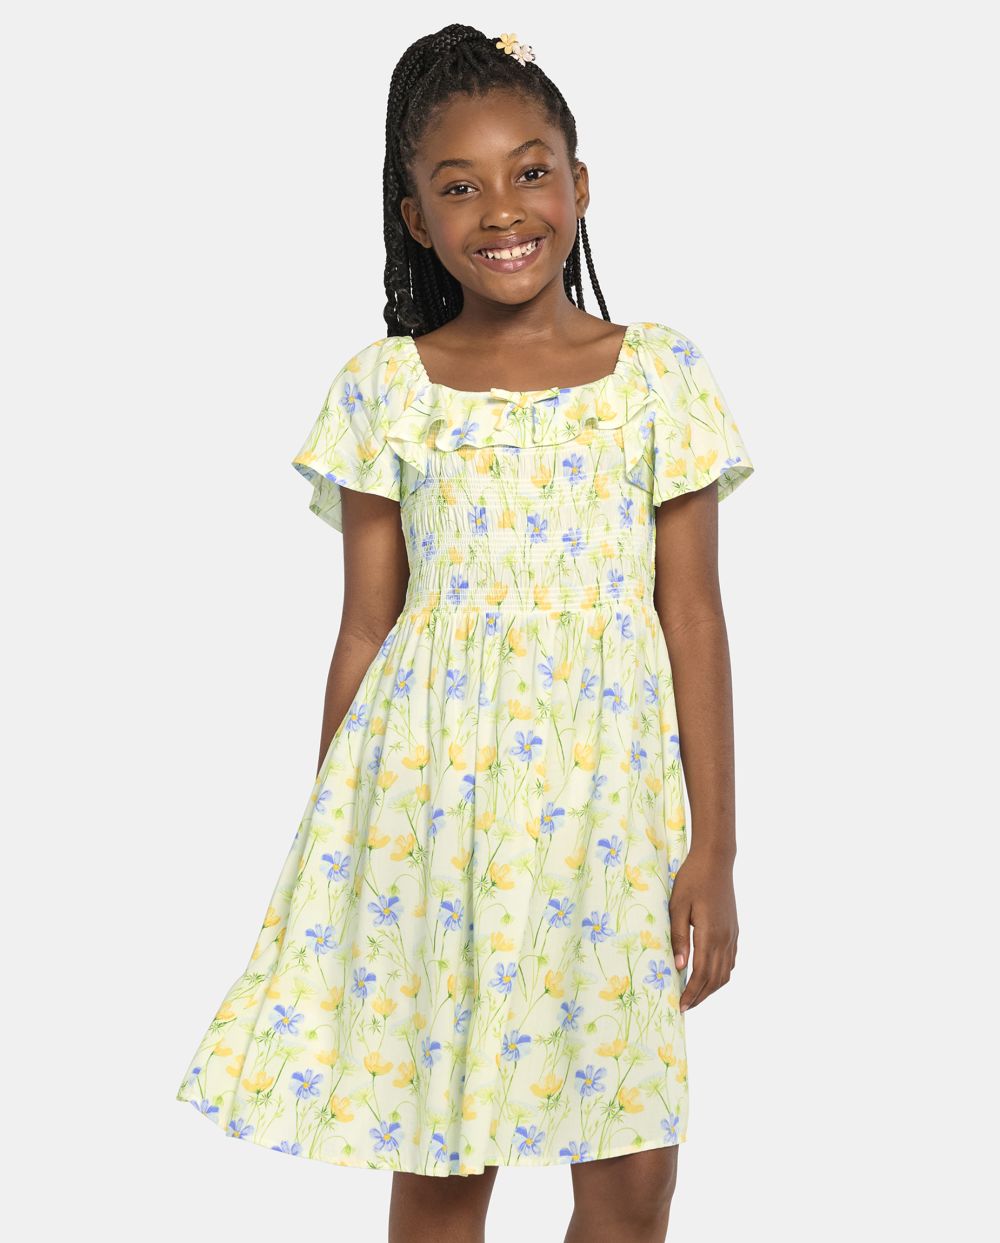 Girls Rayon Smocked Square Neck Above the Knee Flutter Short Sleeves Sleeves Floral Print Dress With a Bow(s)